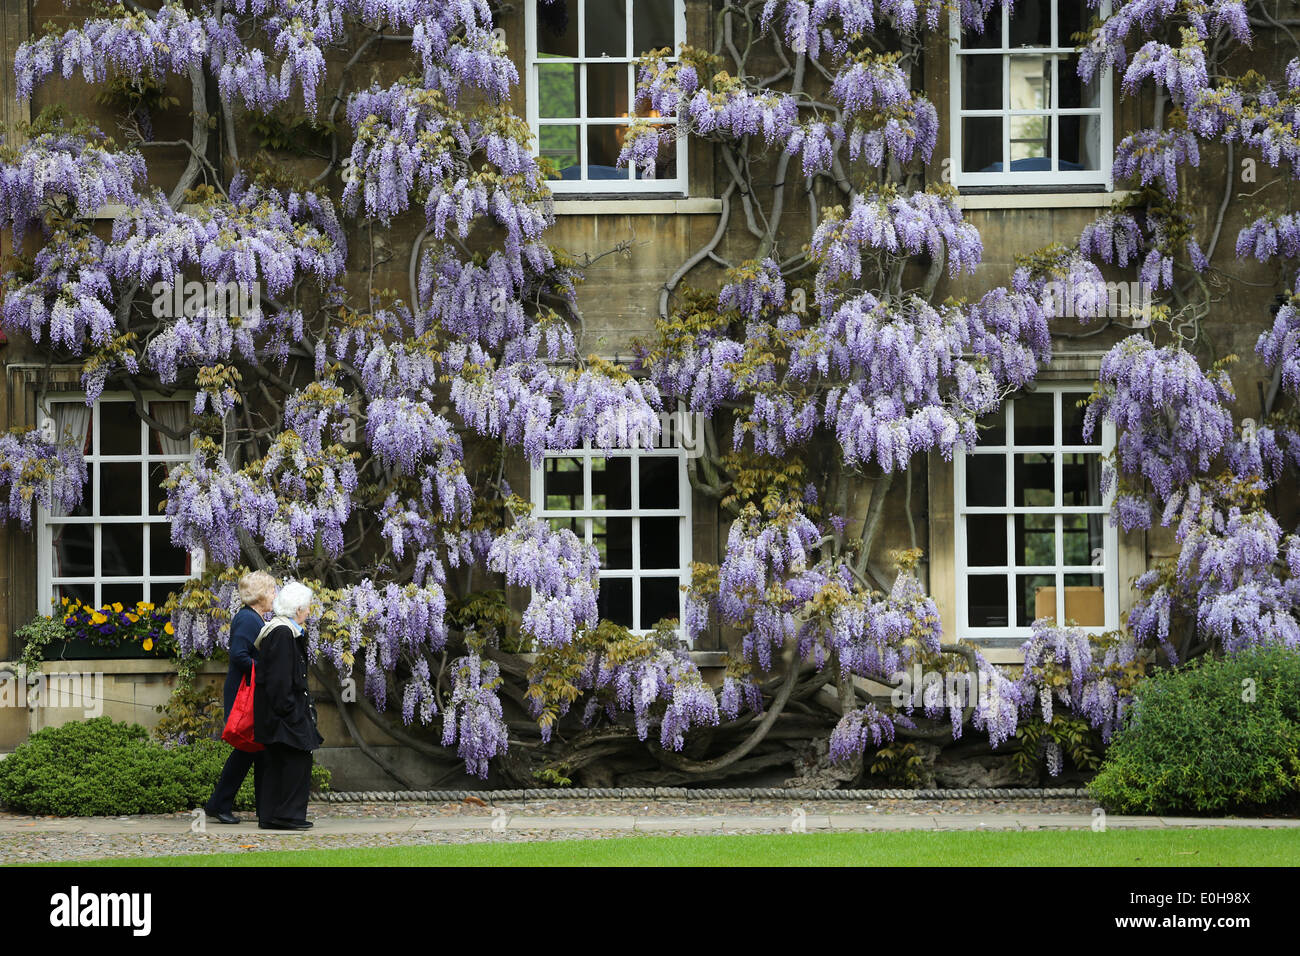 STUDENTS WALKING PAST THE WISTERIA ON THE MASTER'S LODGE AT CHRIST'S  COLLEGE CAMBRIDGE Stock Photo - Alamy